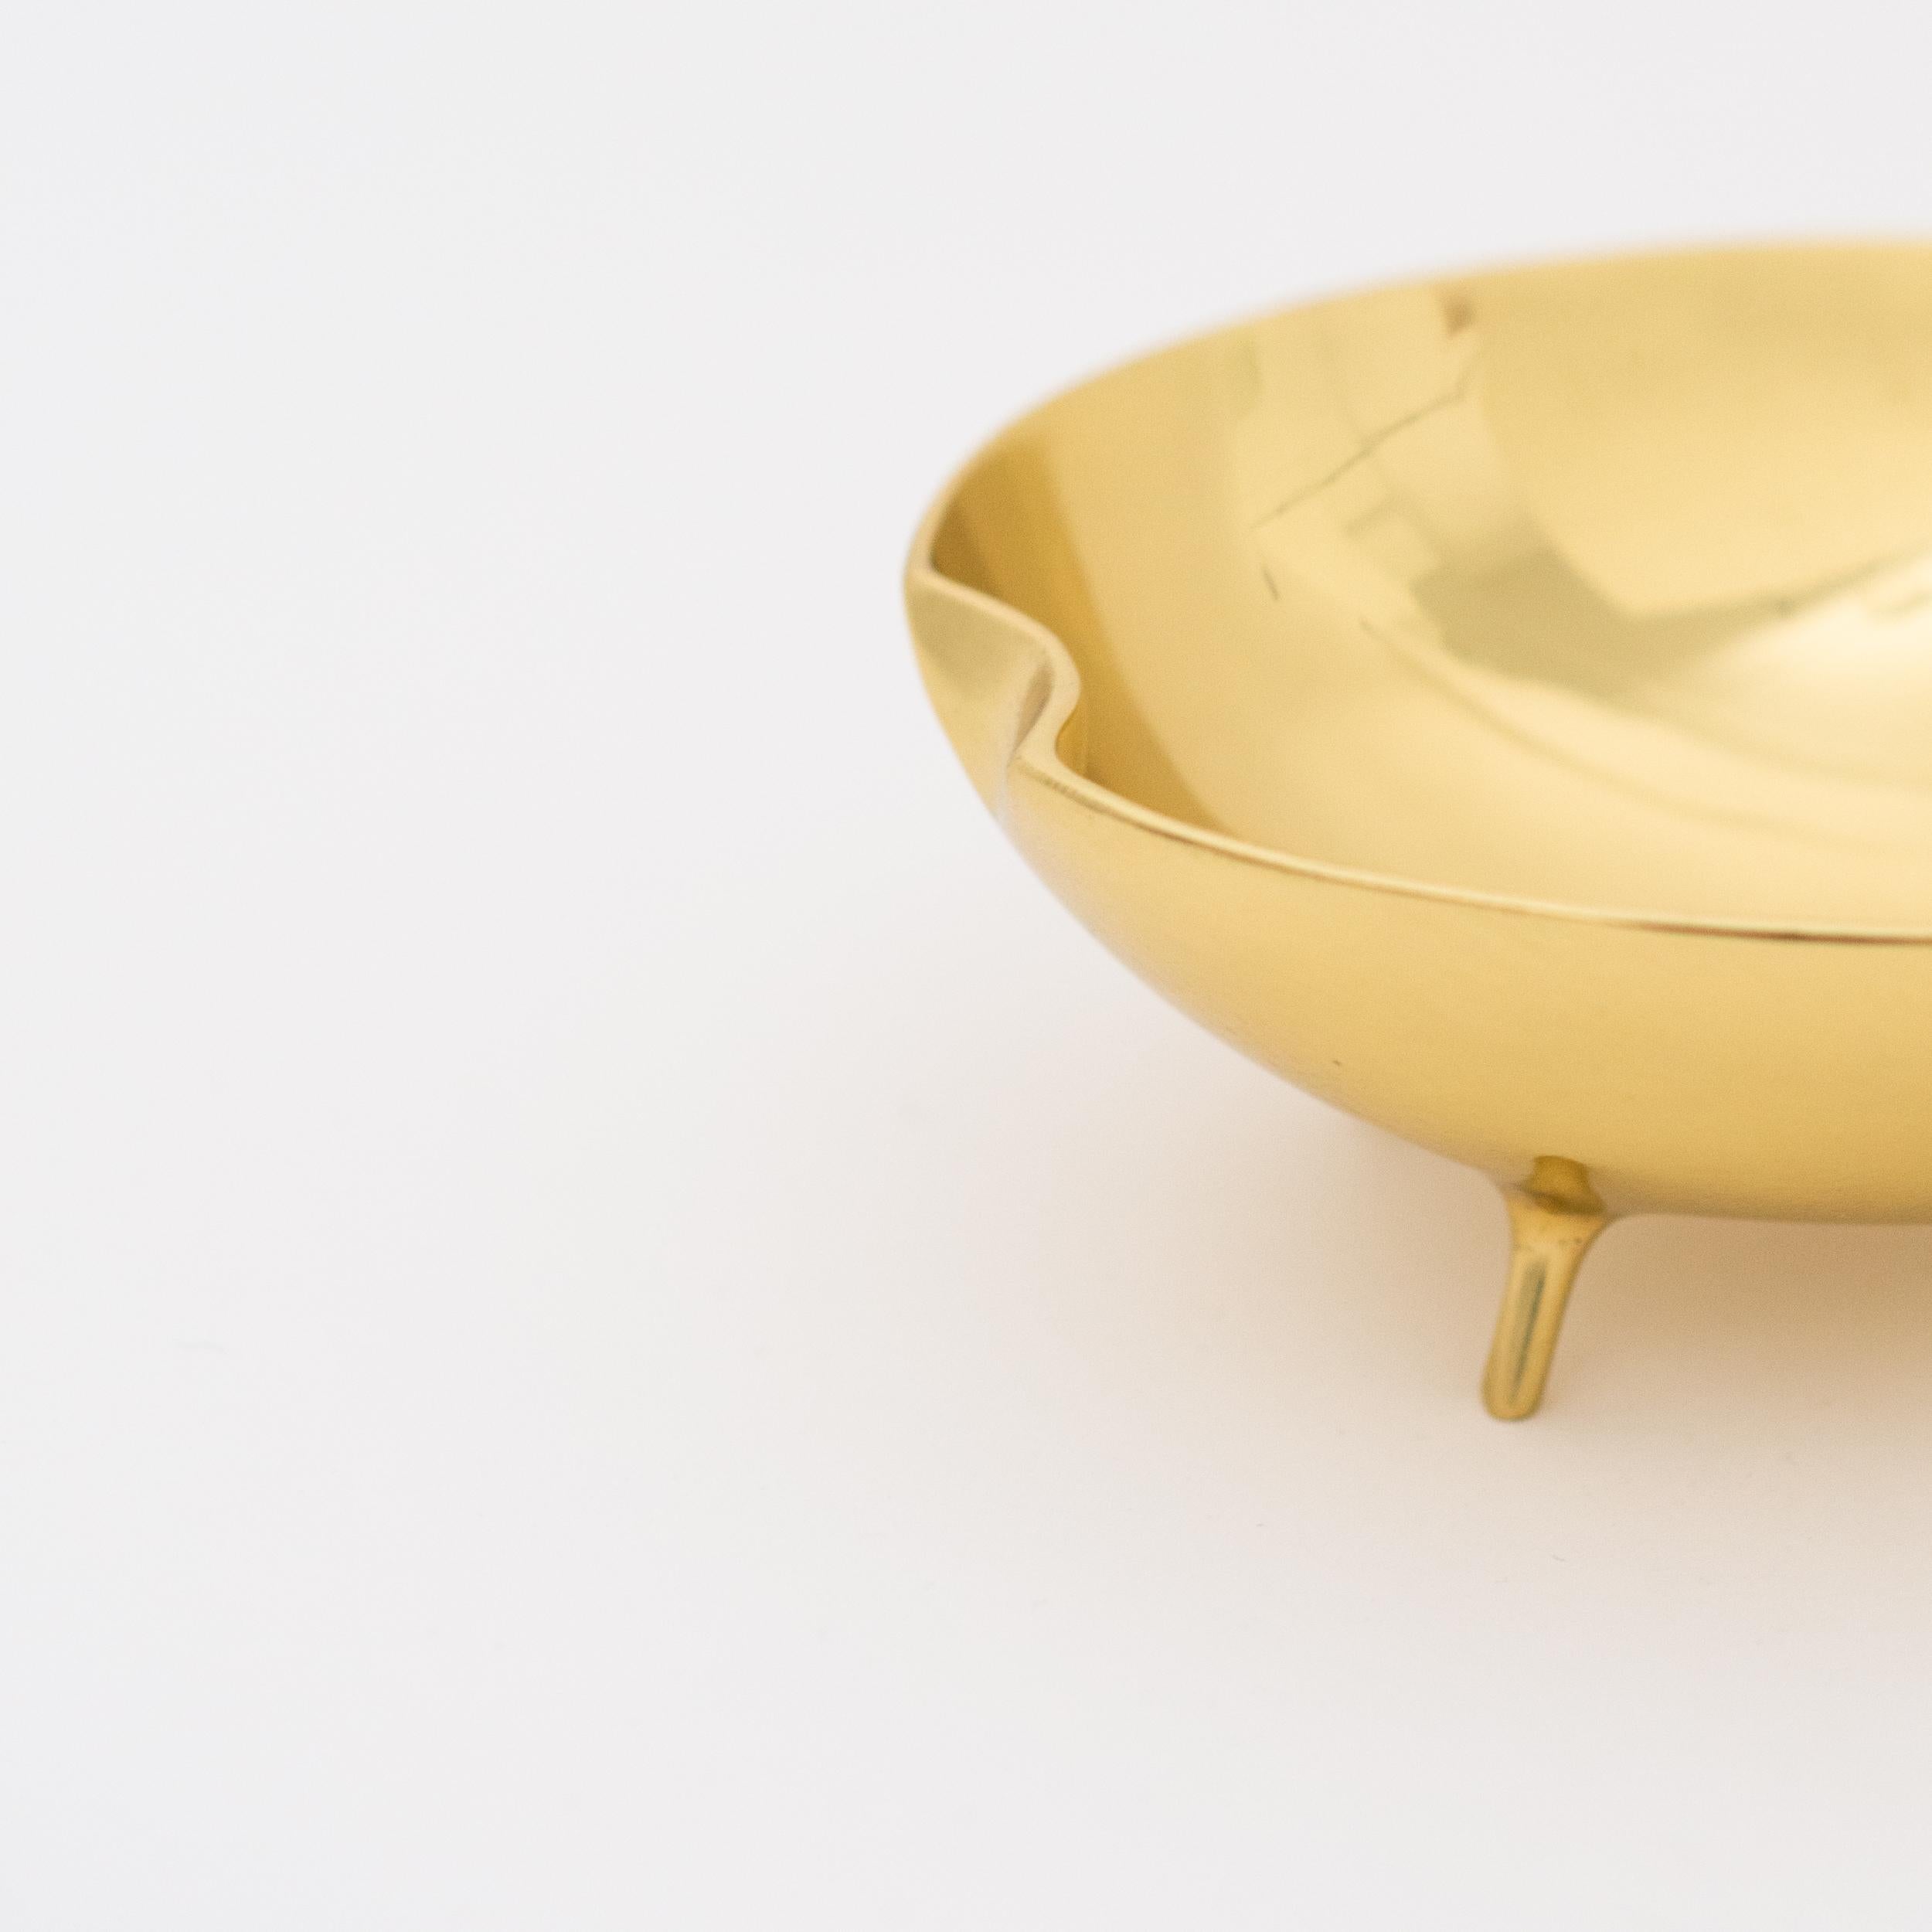 Indian Polished Brass Decorative Bowl Vide-poche with Legs For Sale